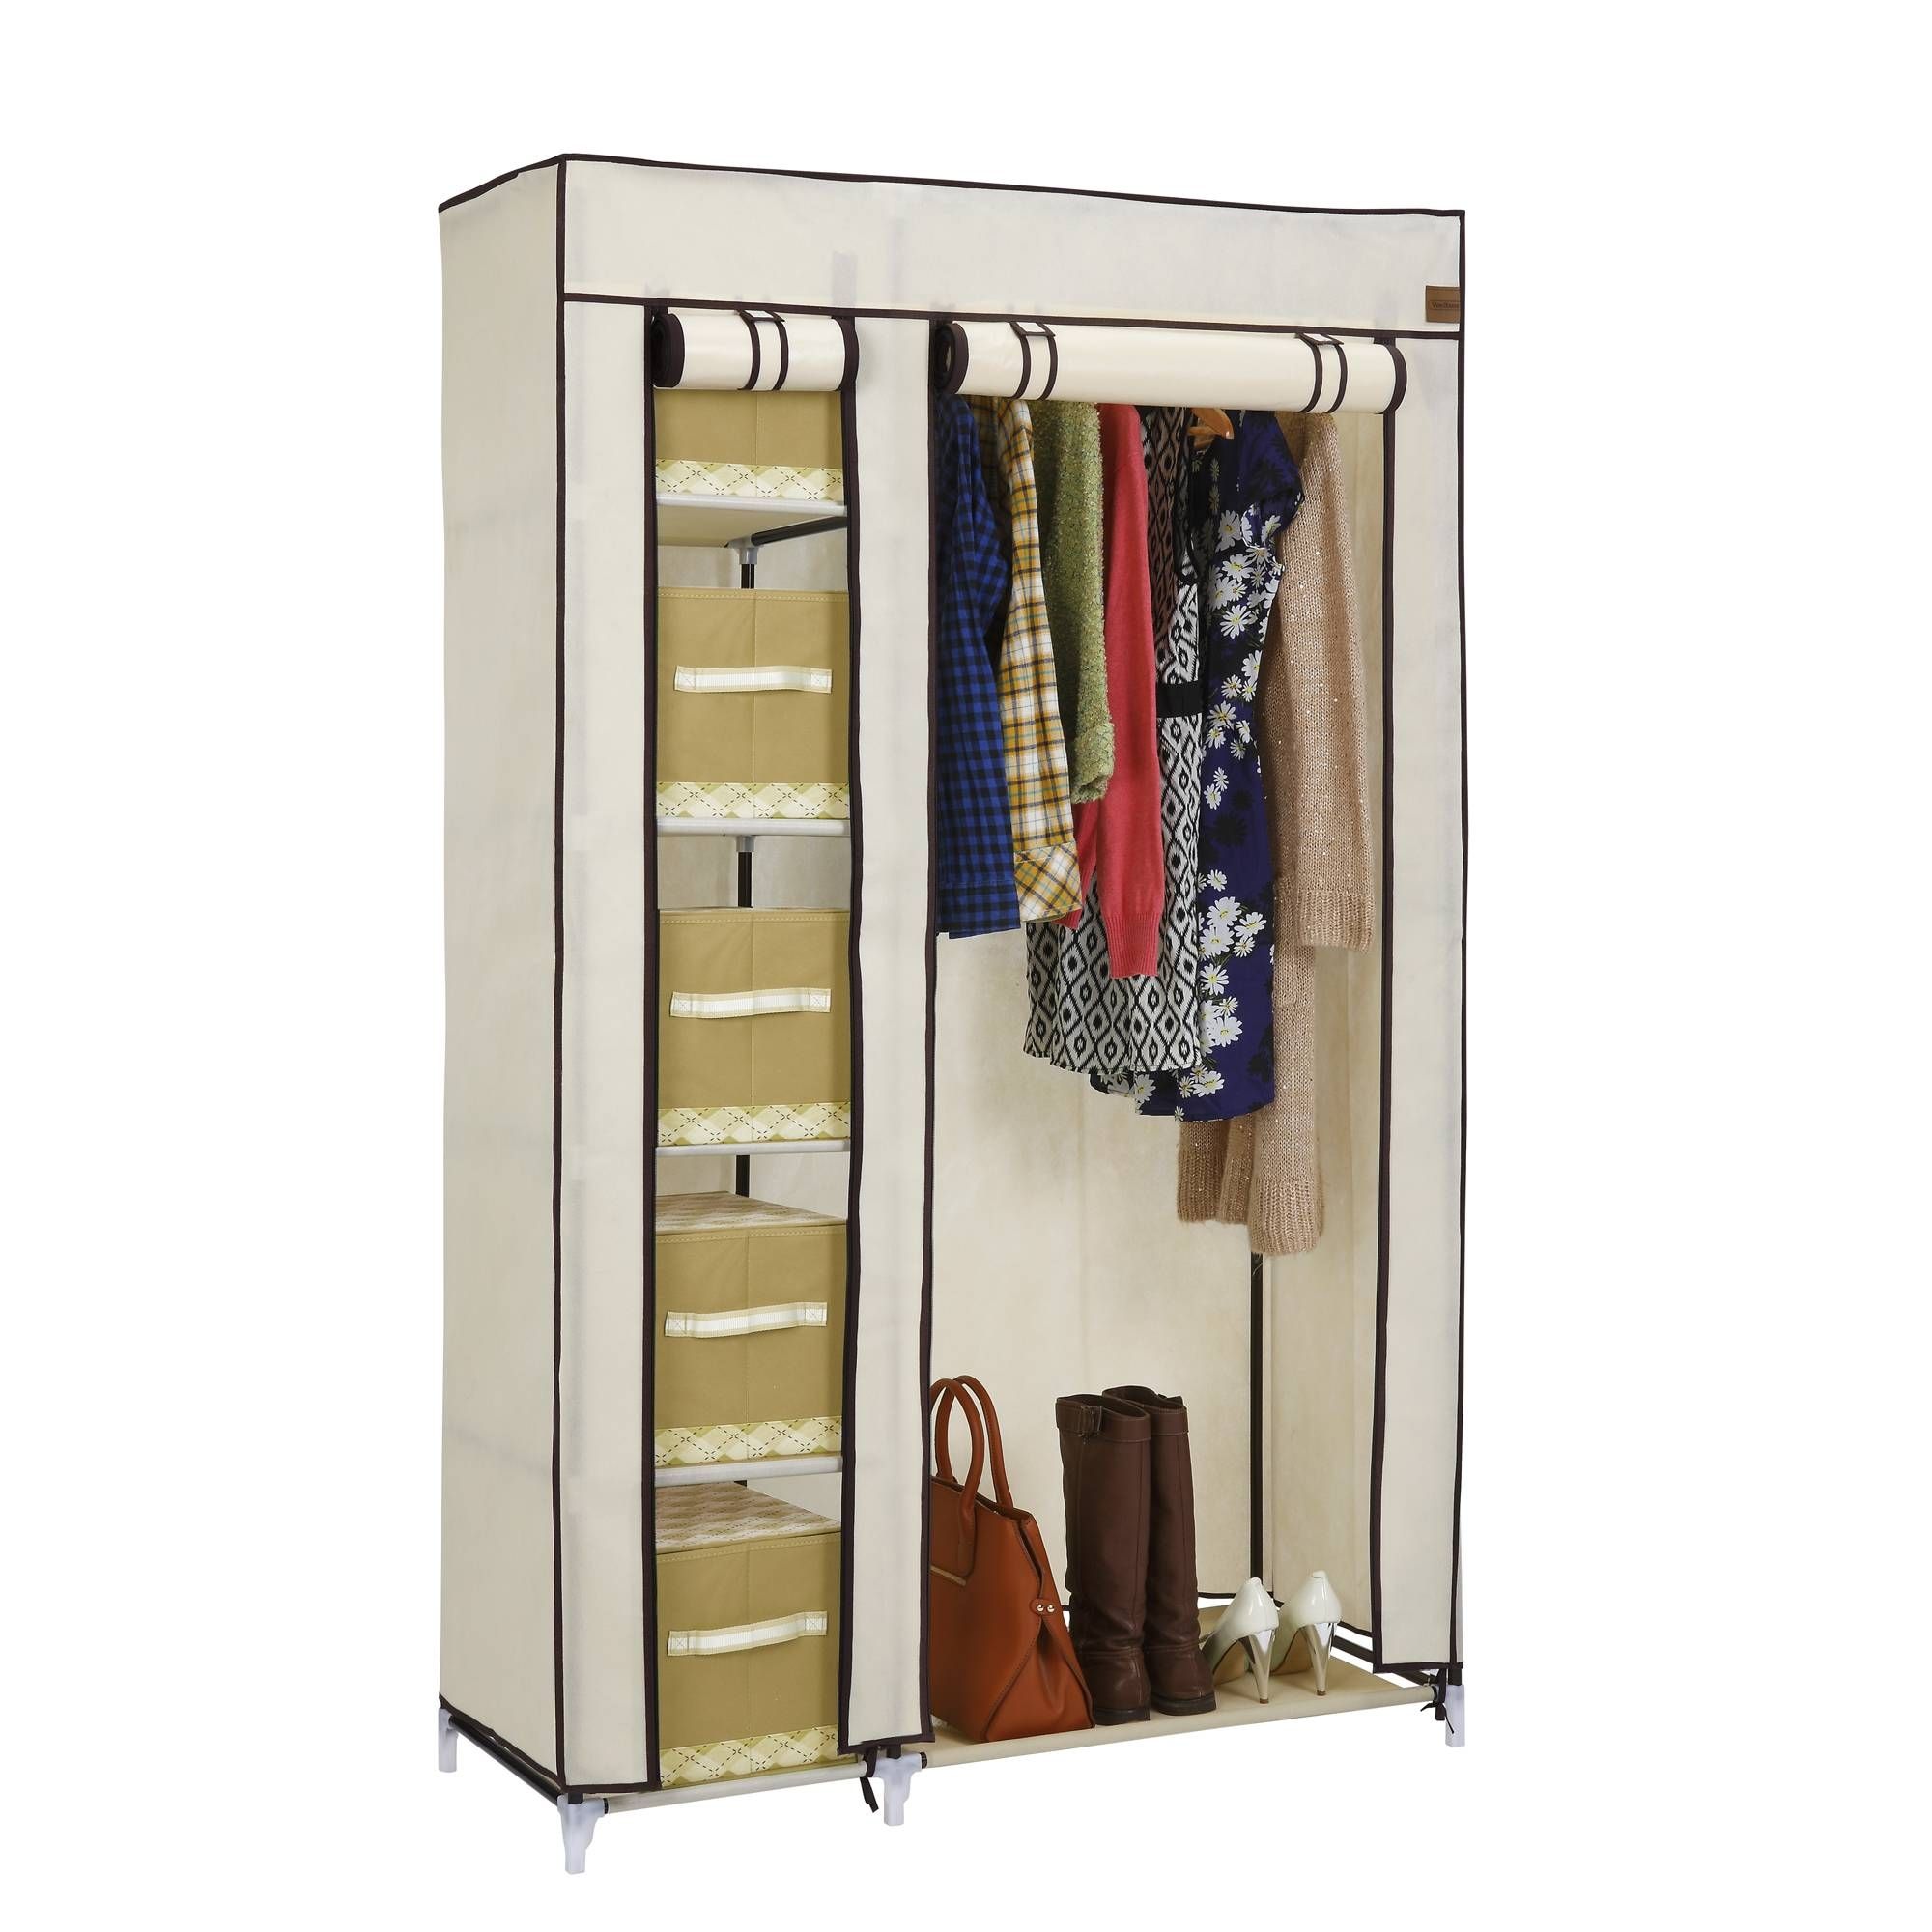 Vonhaus Double Canvas Effect Wardrobe Clothes Hanging Rail Shelves For Double Clothes Rail Wardrobes (View 5 of 30)